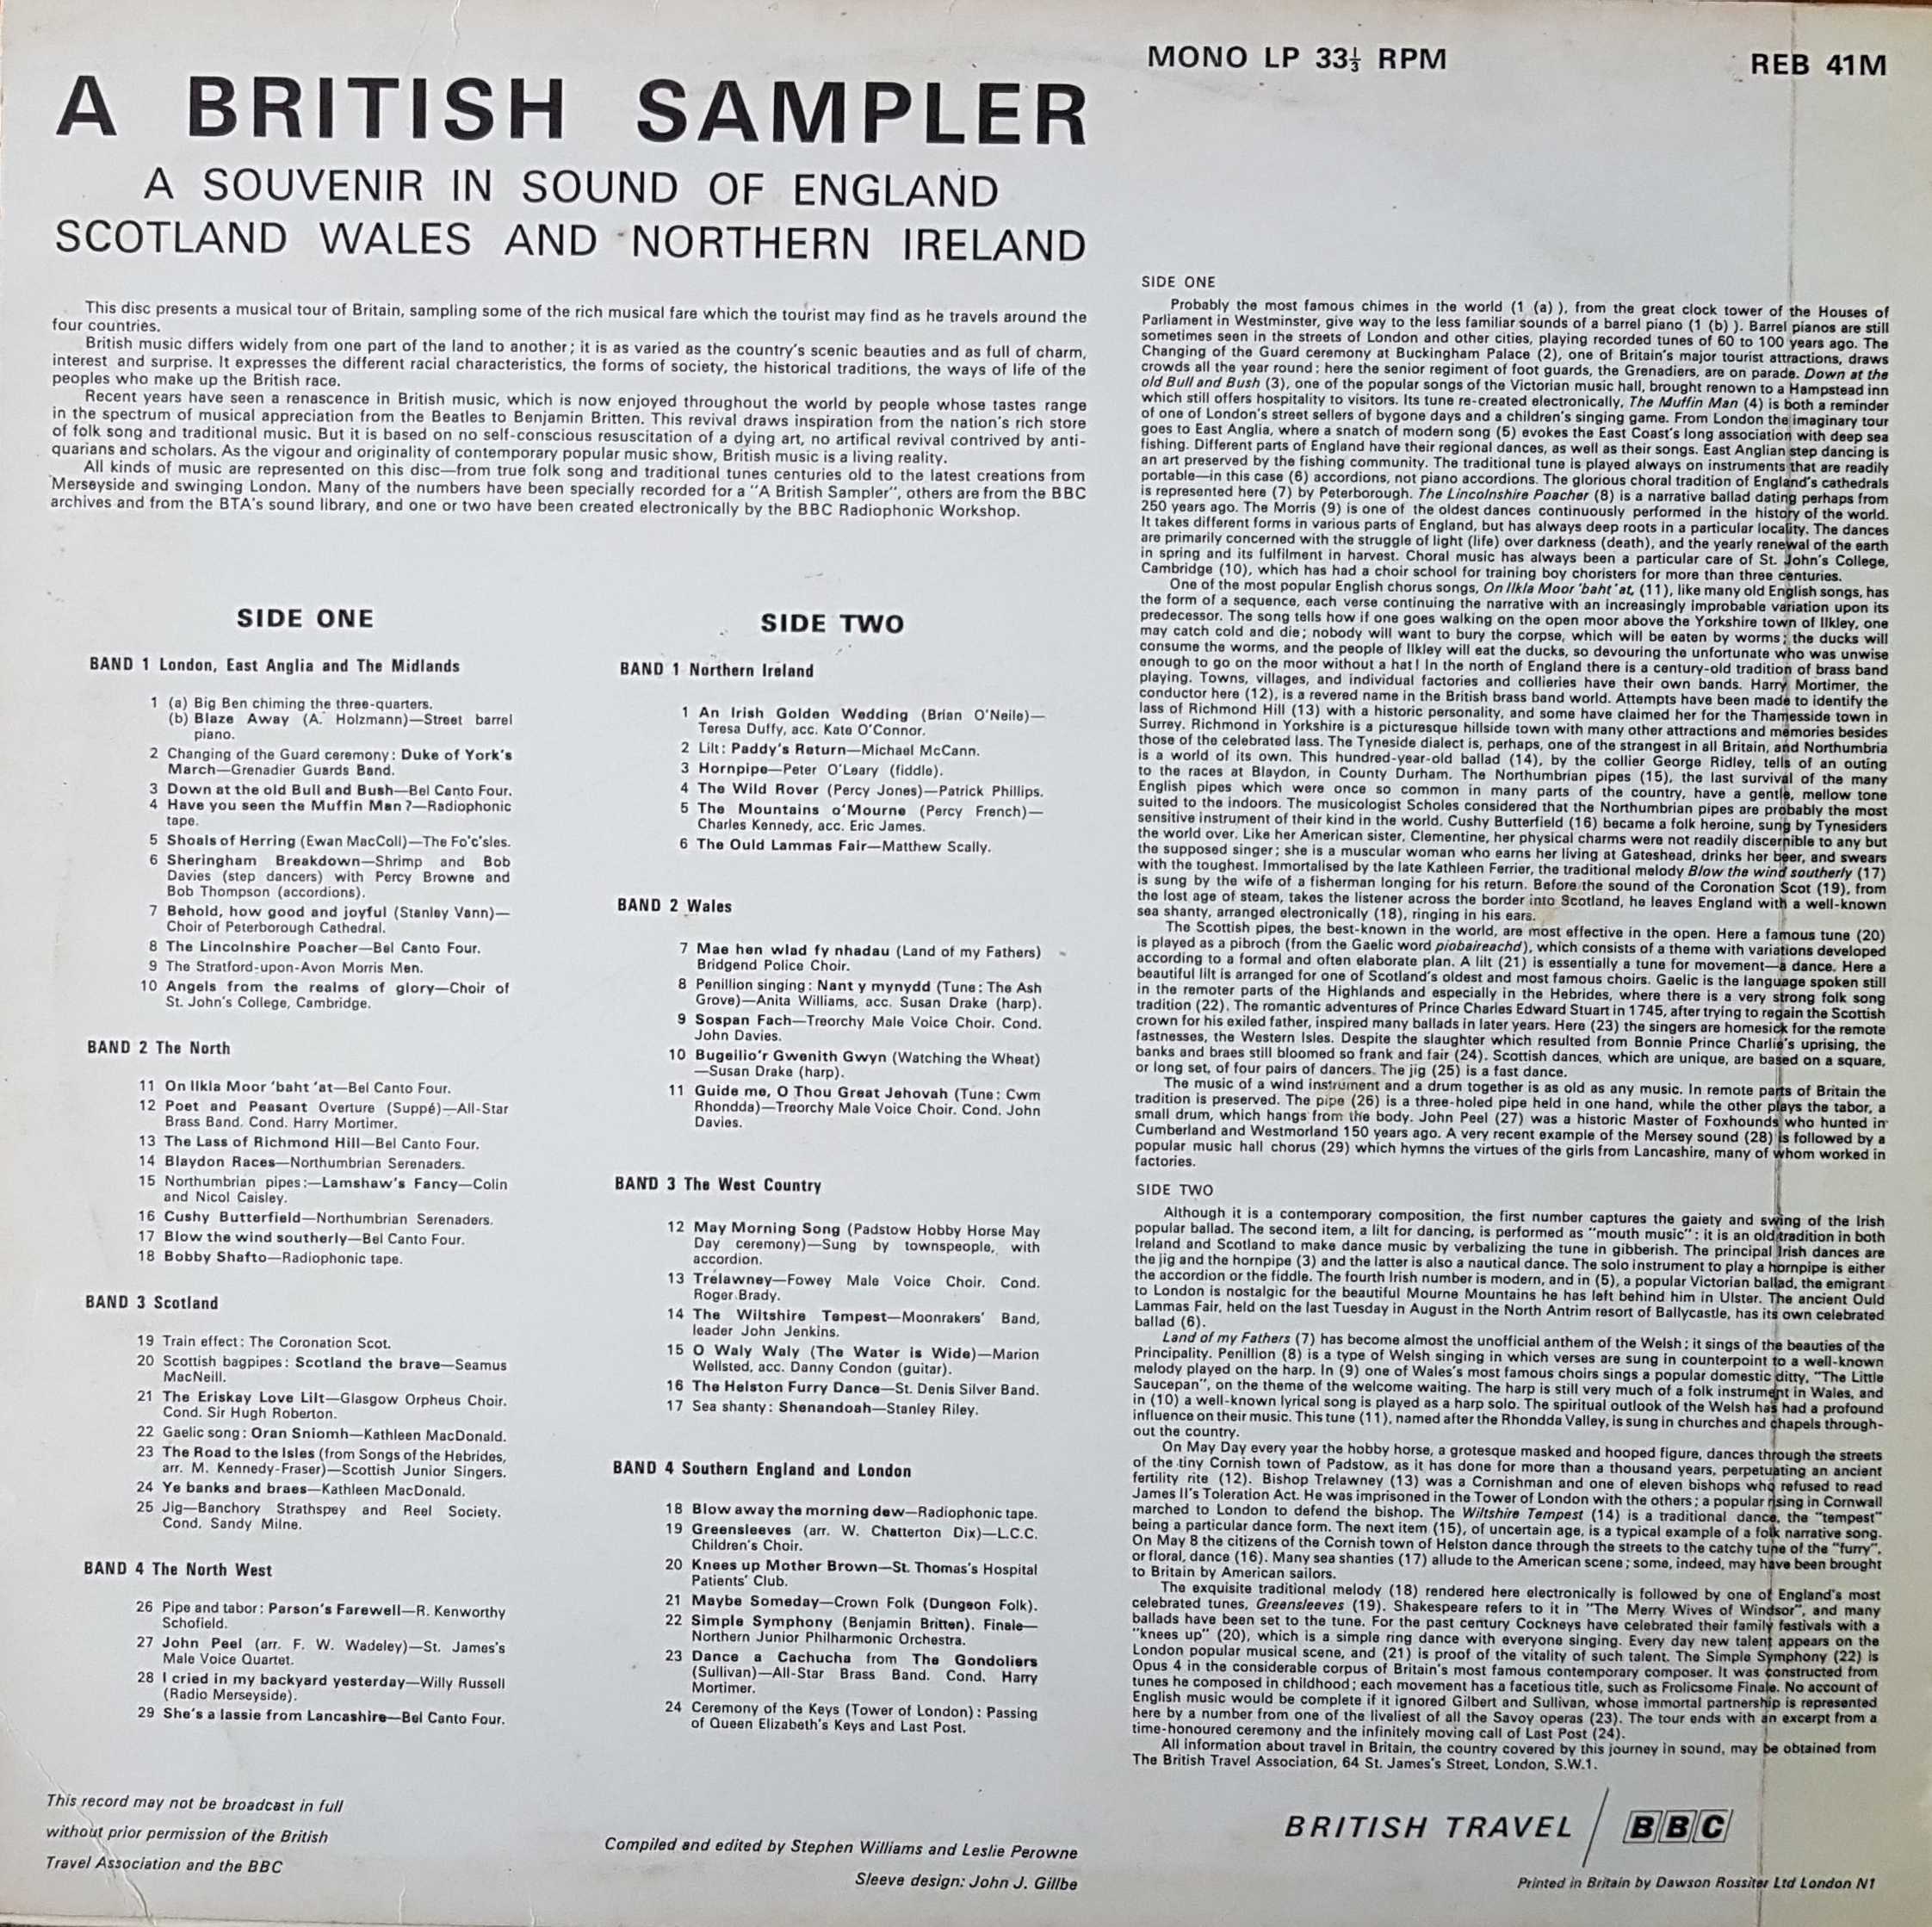 Picture of REB 41 A British sampler by artist Various from the BBC records and Tapes library